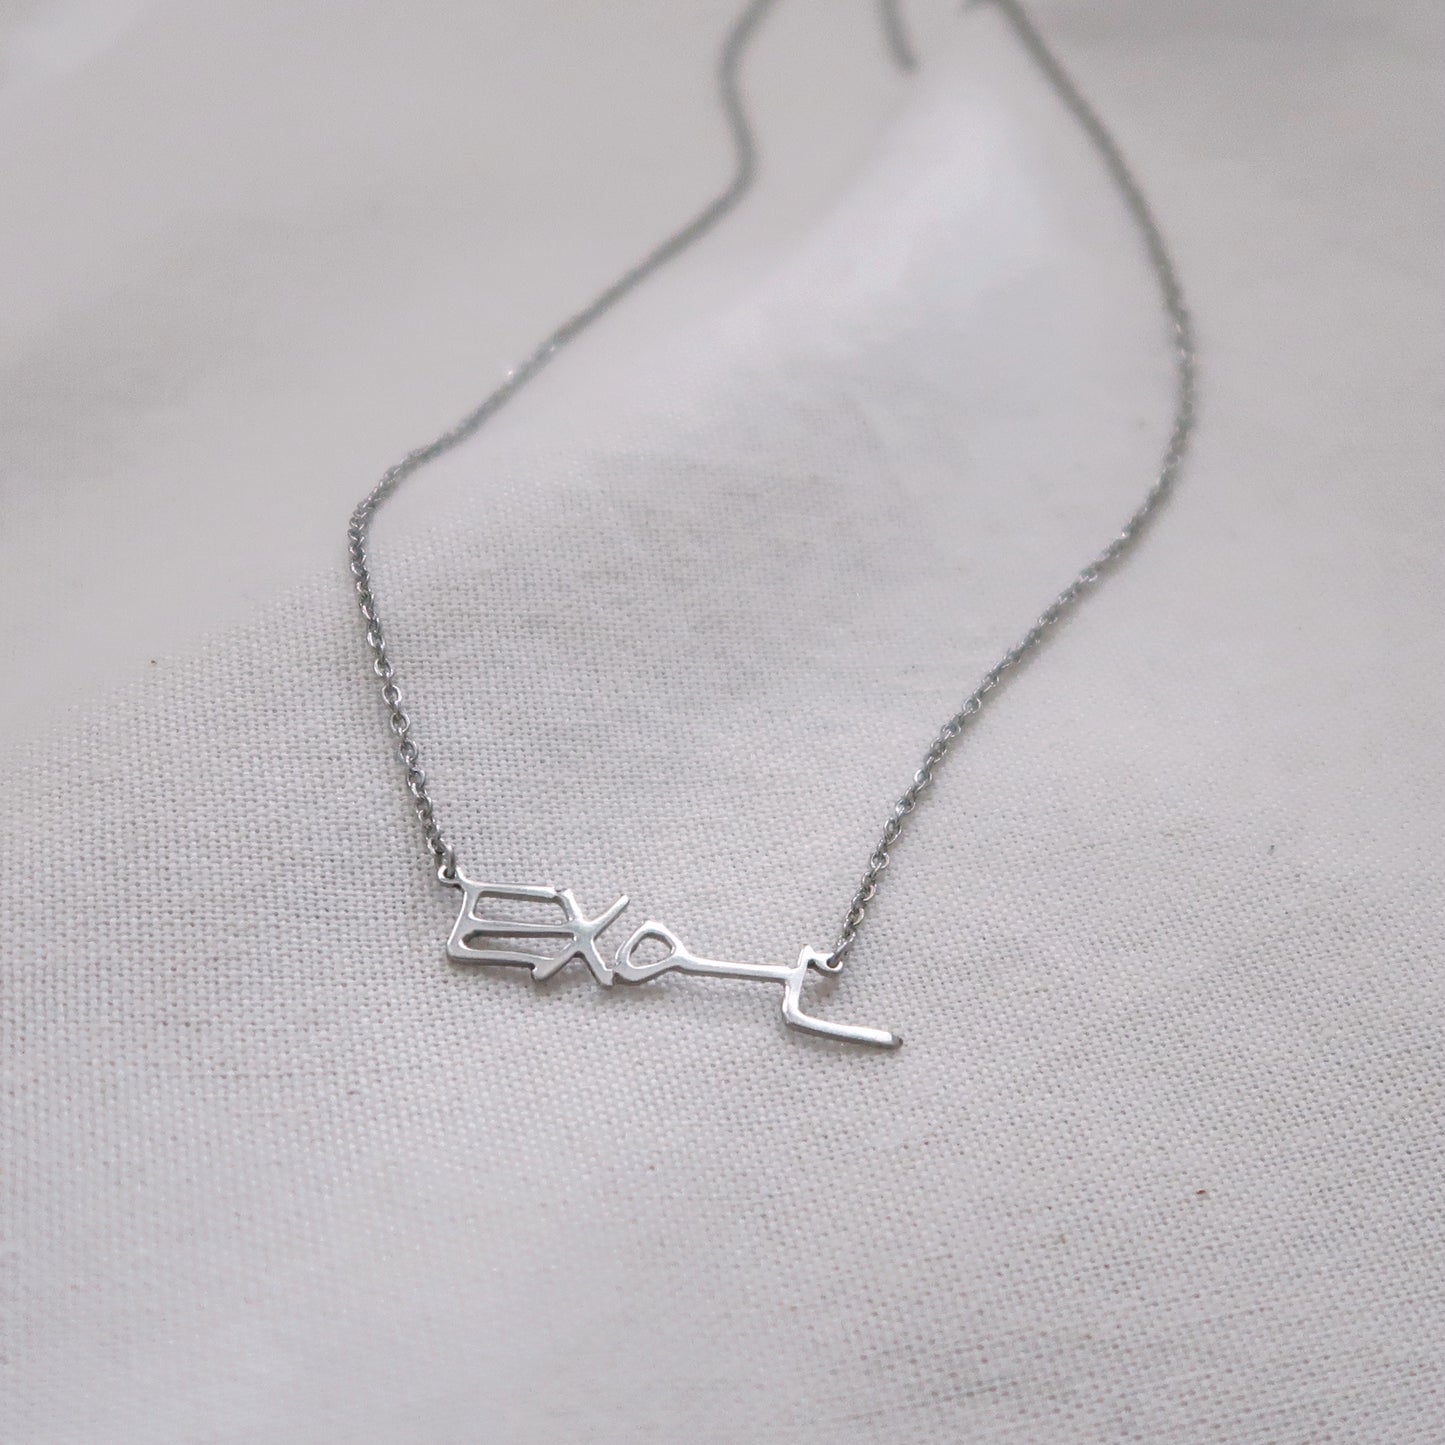 EXO-L (BY SEHUN) NECKLACE